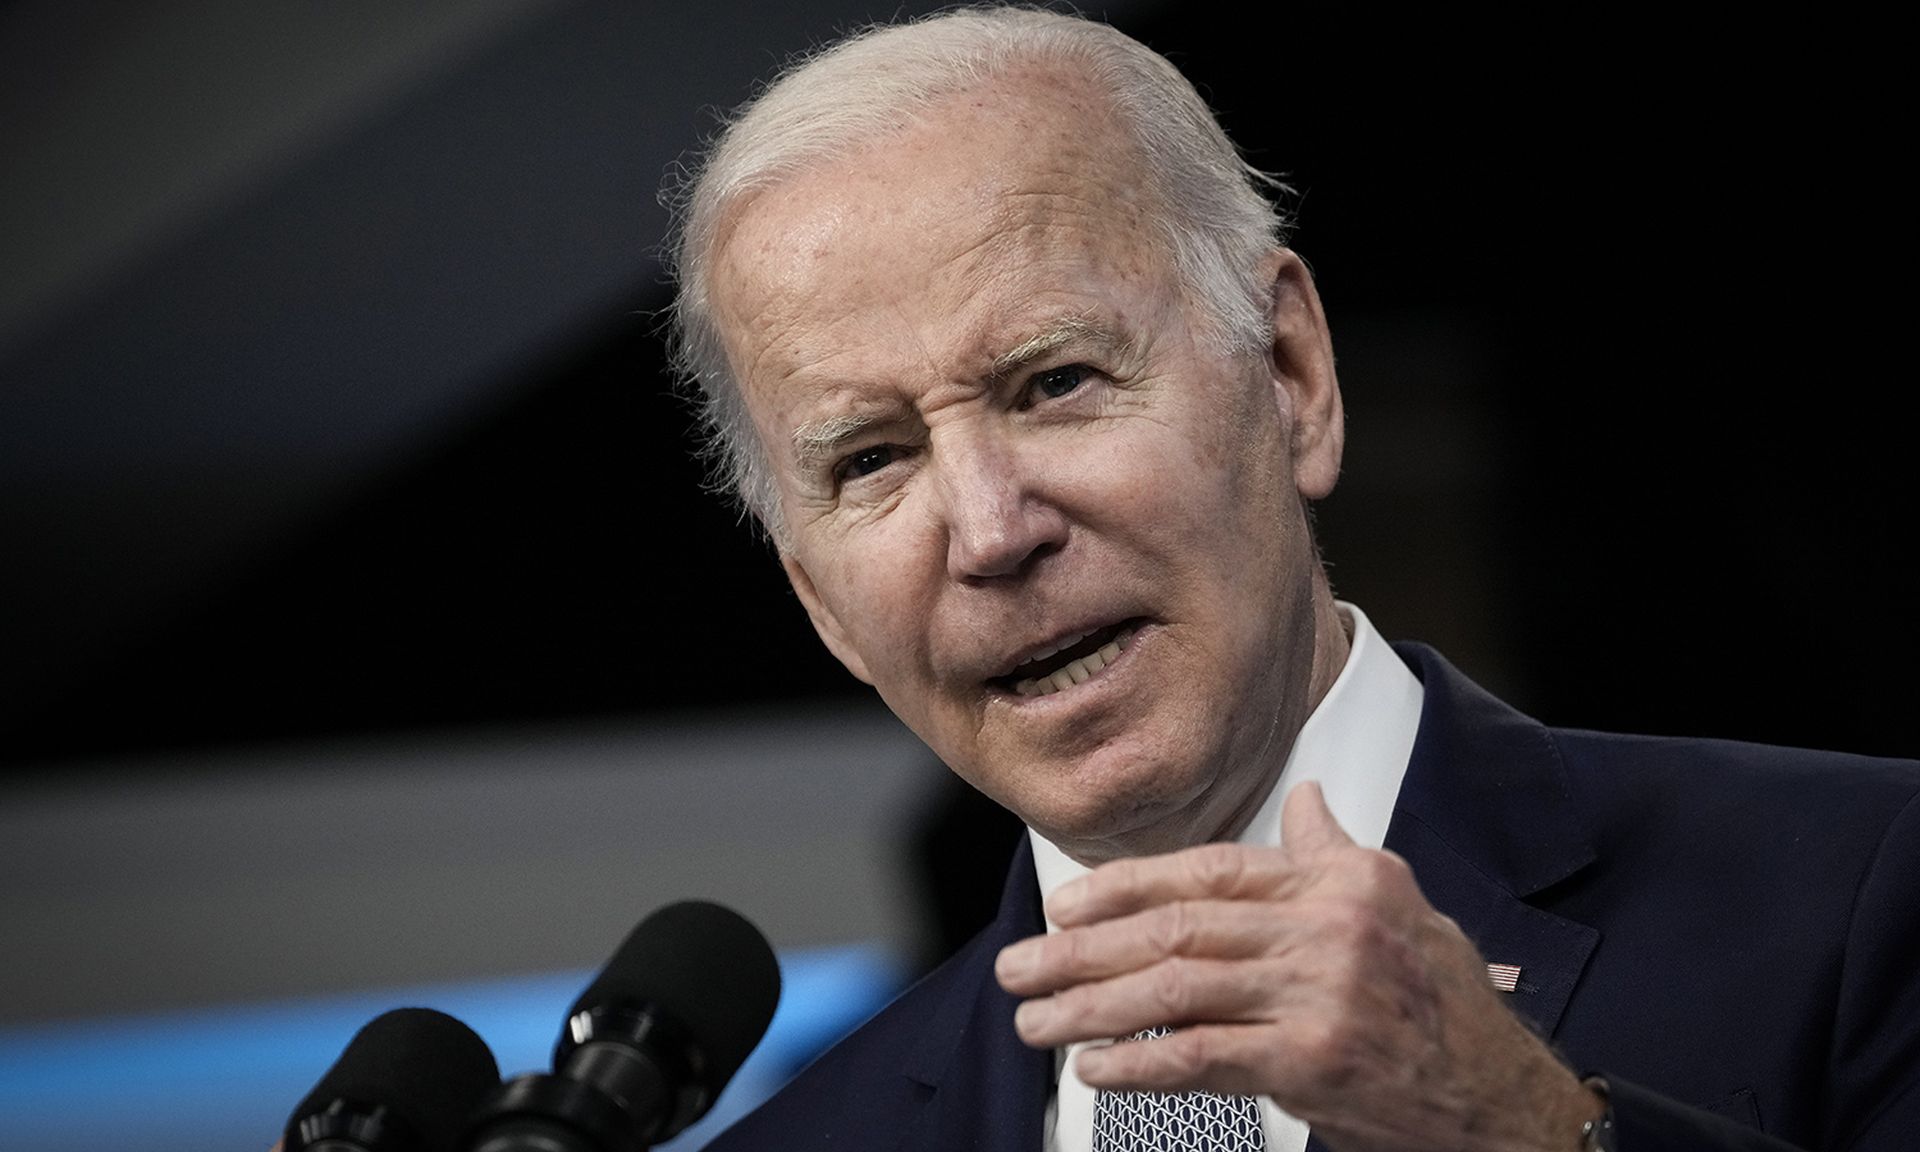 The Biden administration has taken the lead on promoting a zero-trust strategy. Today’s columnist, John DeSimone of Raytheon Intelligence and Space, says CIOs must work closely with CISOs and the security team to create an effective zero-trust program. (Photo by Drew Angerer/Getty Images)